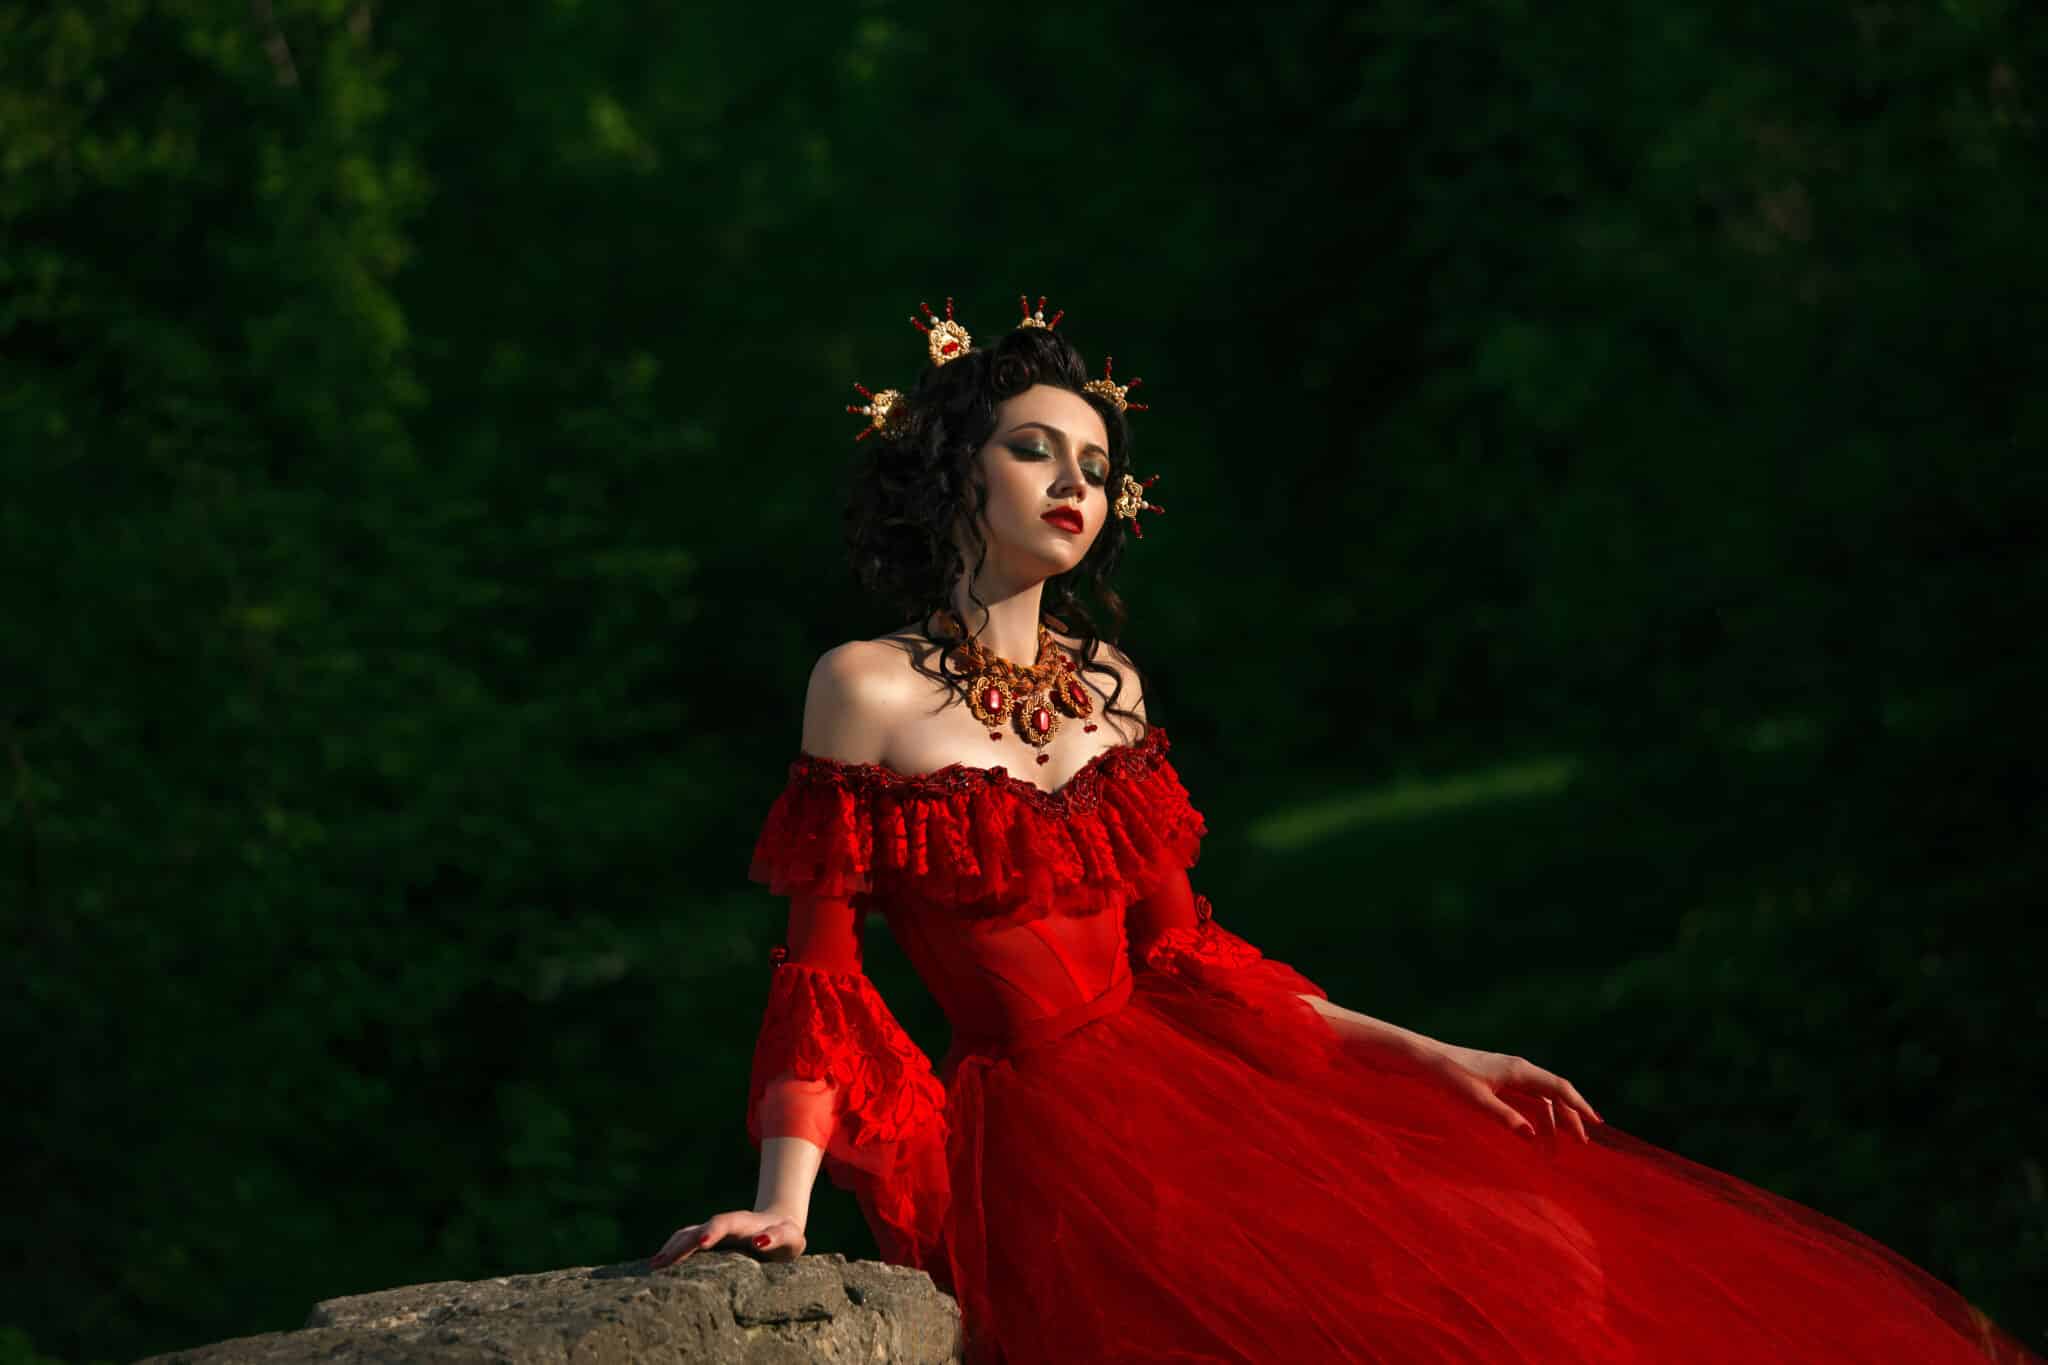 The young Countess in a luxurious red dress sitting of nature.